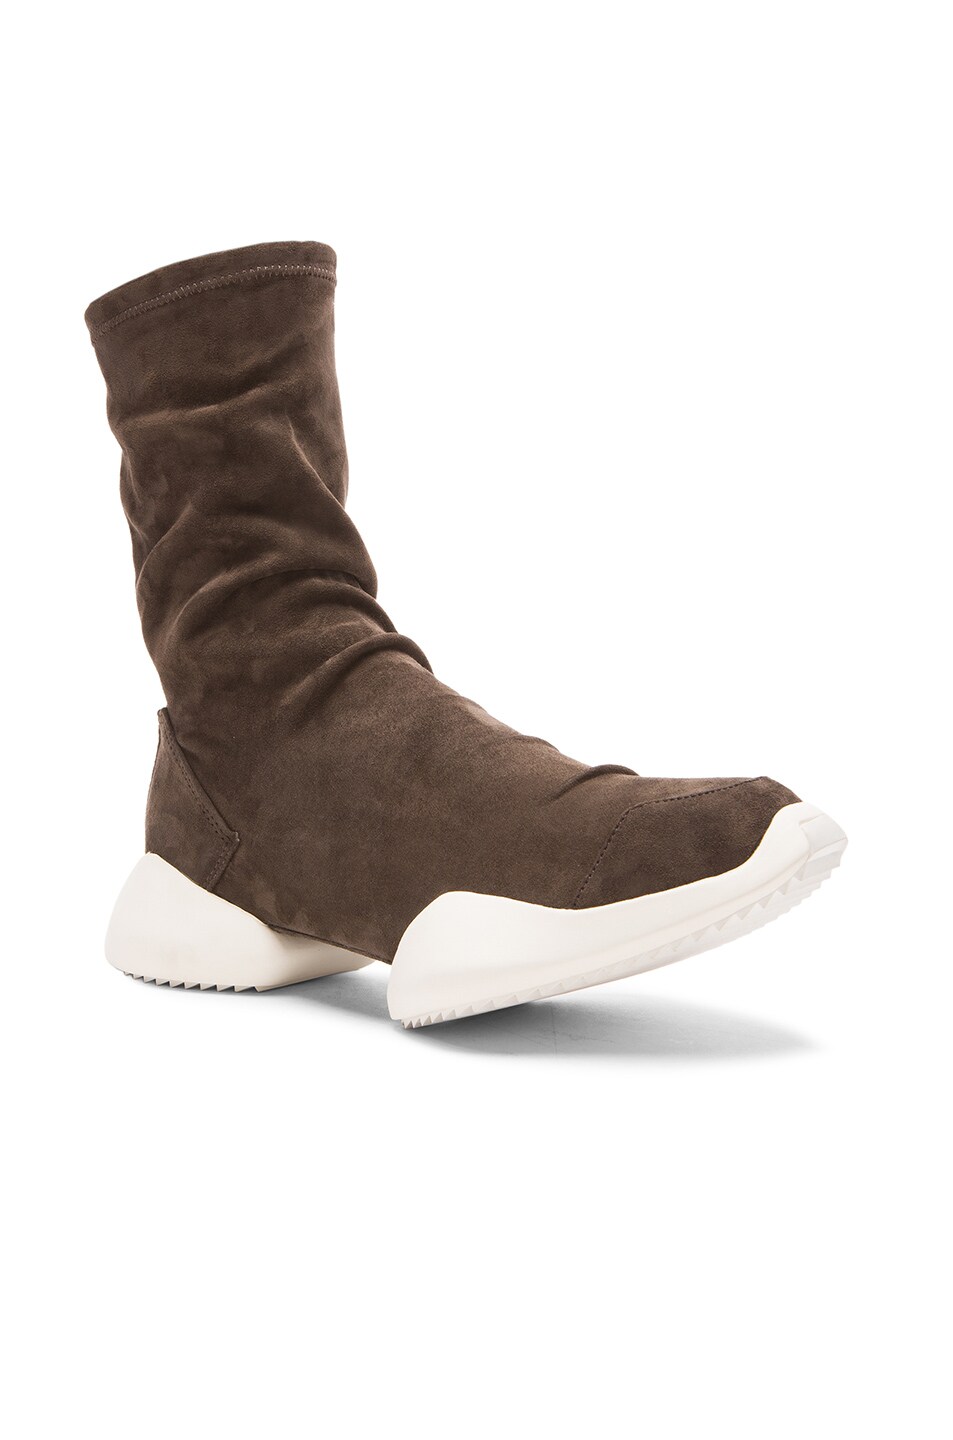 Image 1 of Rick Owens x Adidas Ankle Suede Boots Vicious Sole in Black/Brown